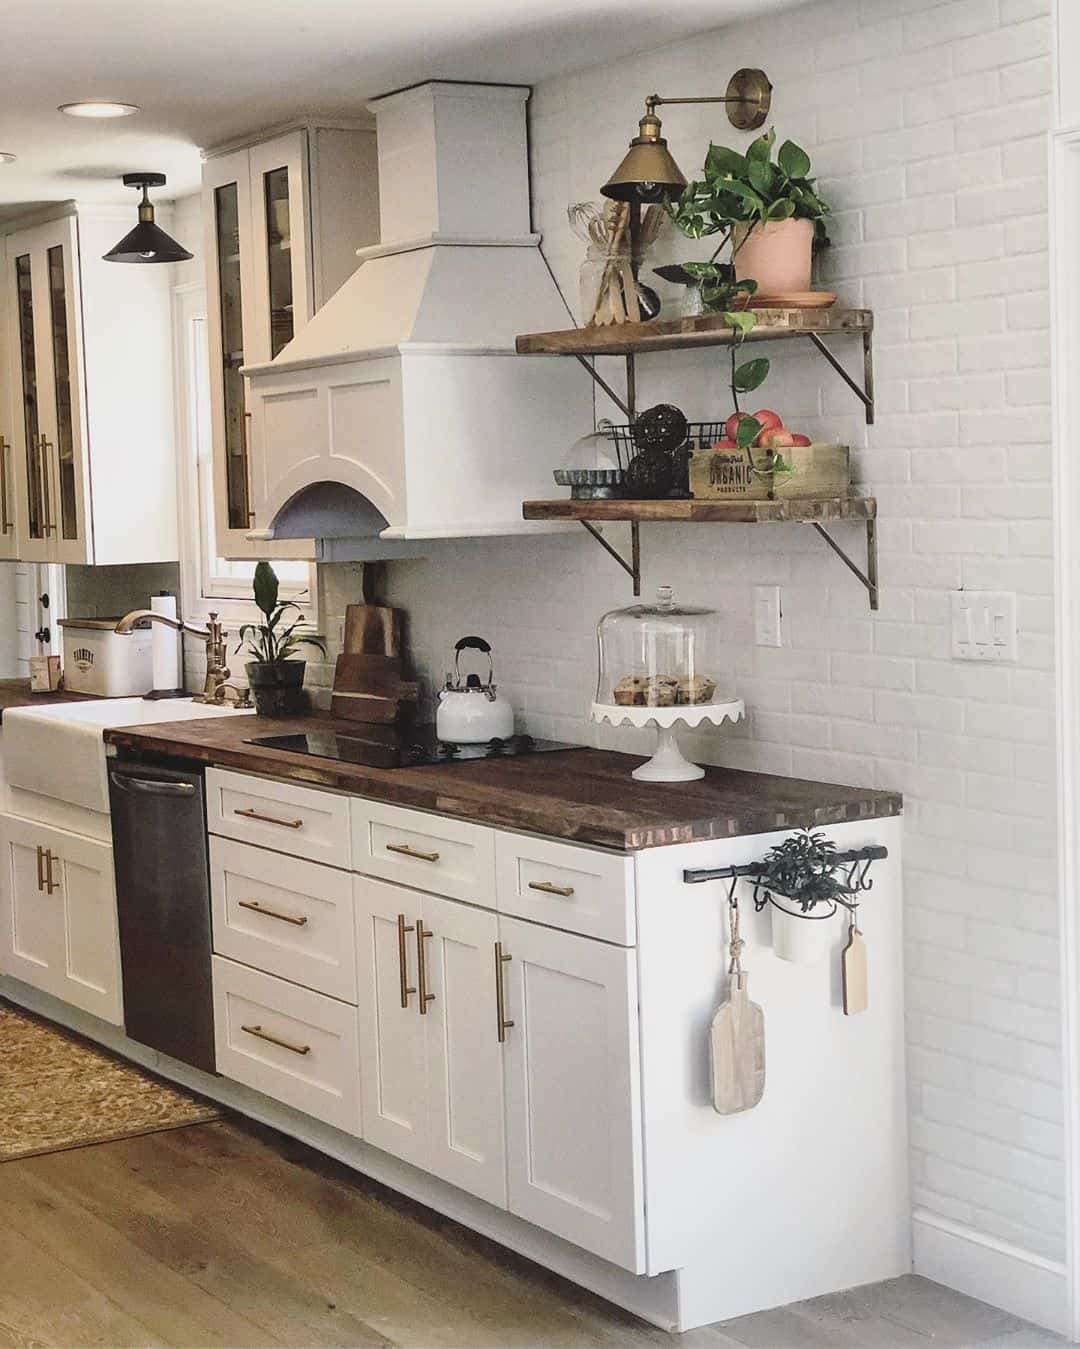 21 Clever Ideas for Decorating Your Kitchen in Farm House Style – SORTRA